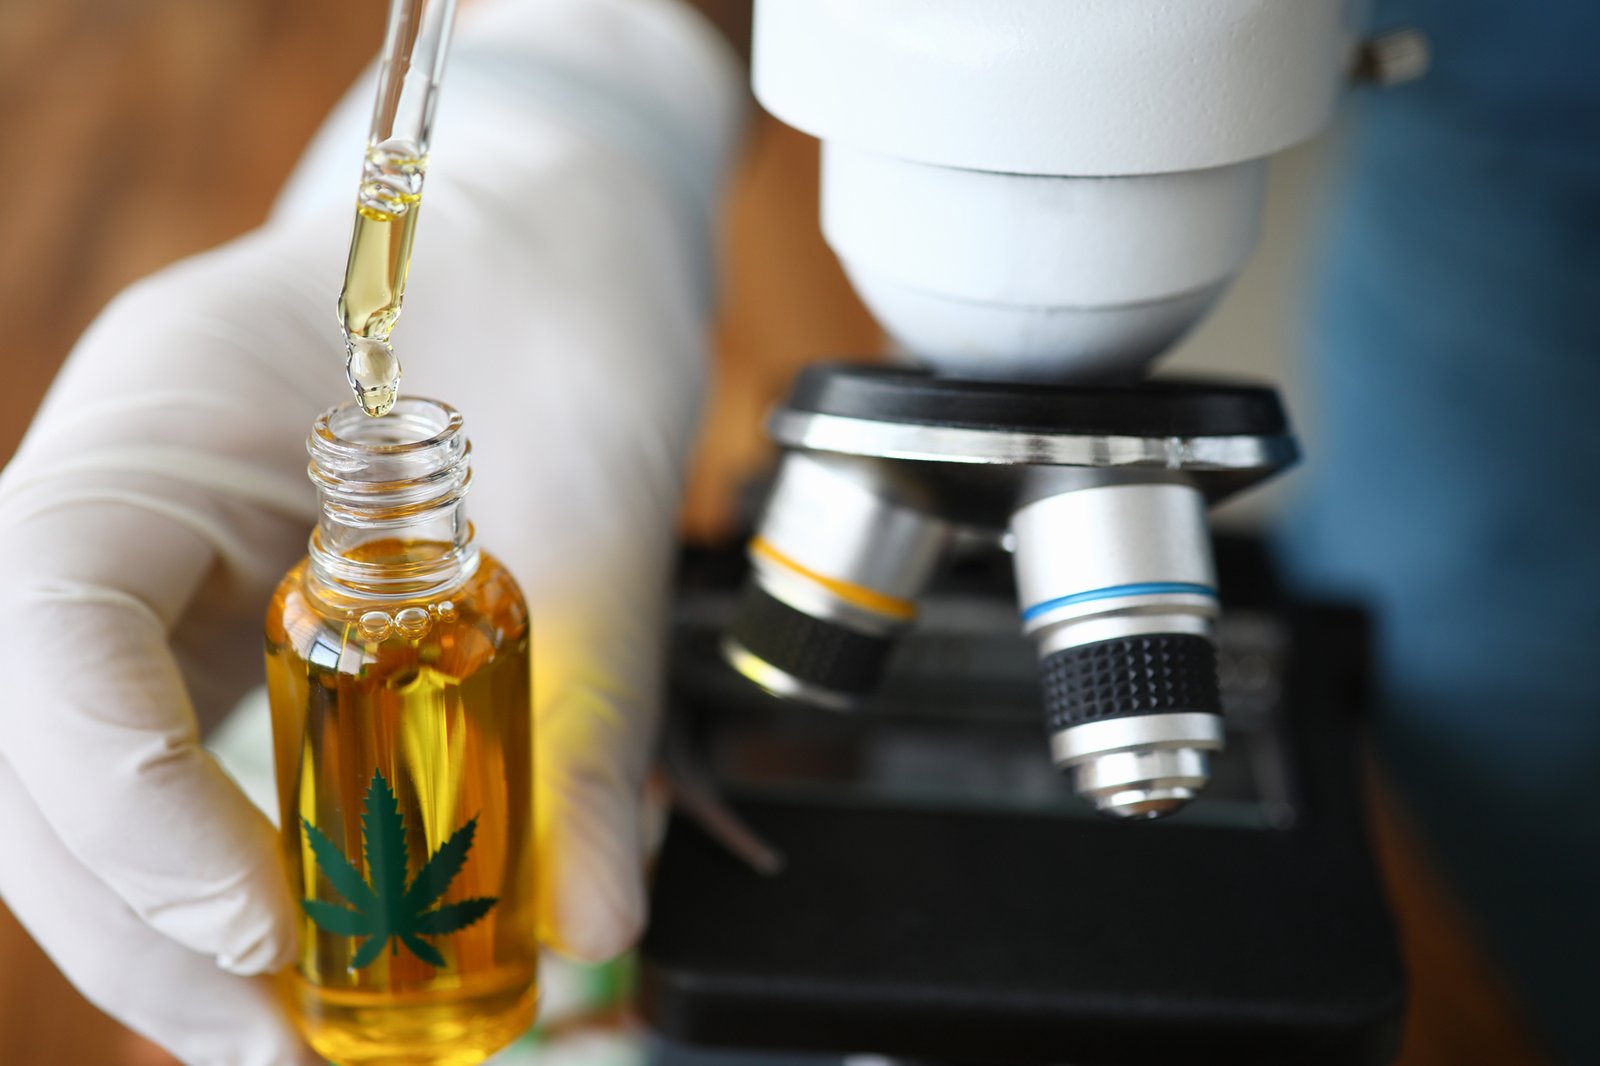 Microscope background with CBD oil droplet container in foreground